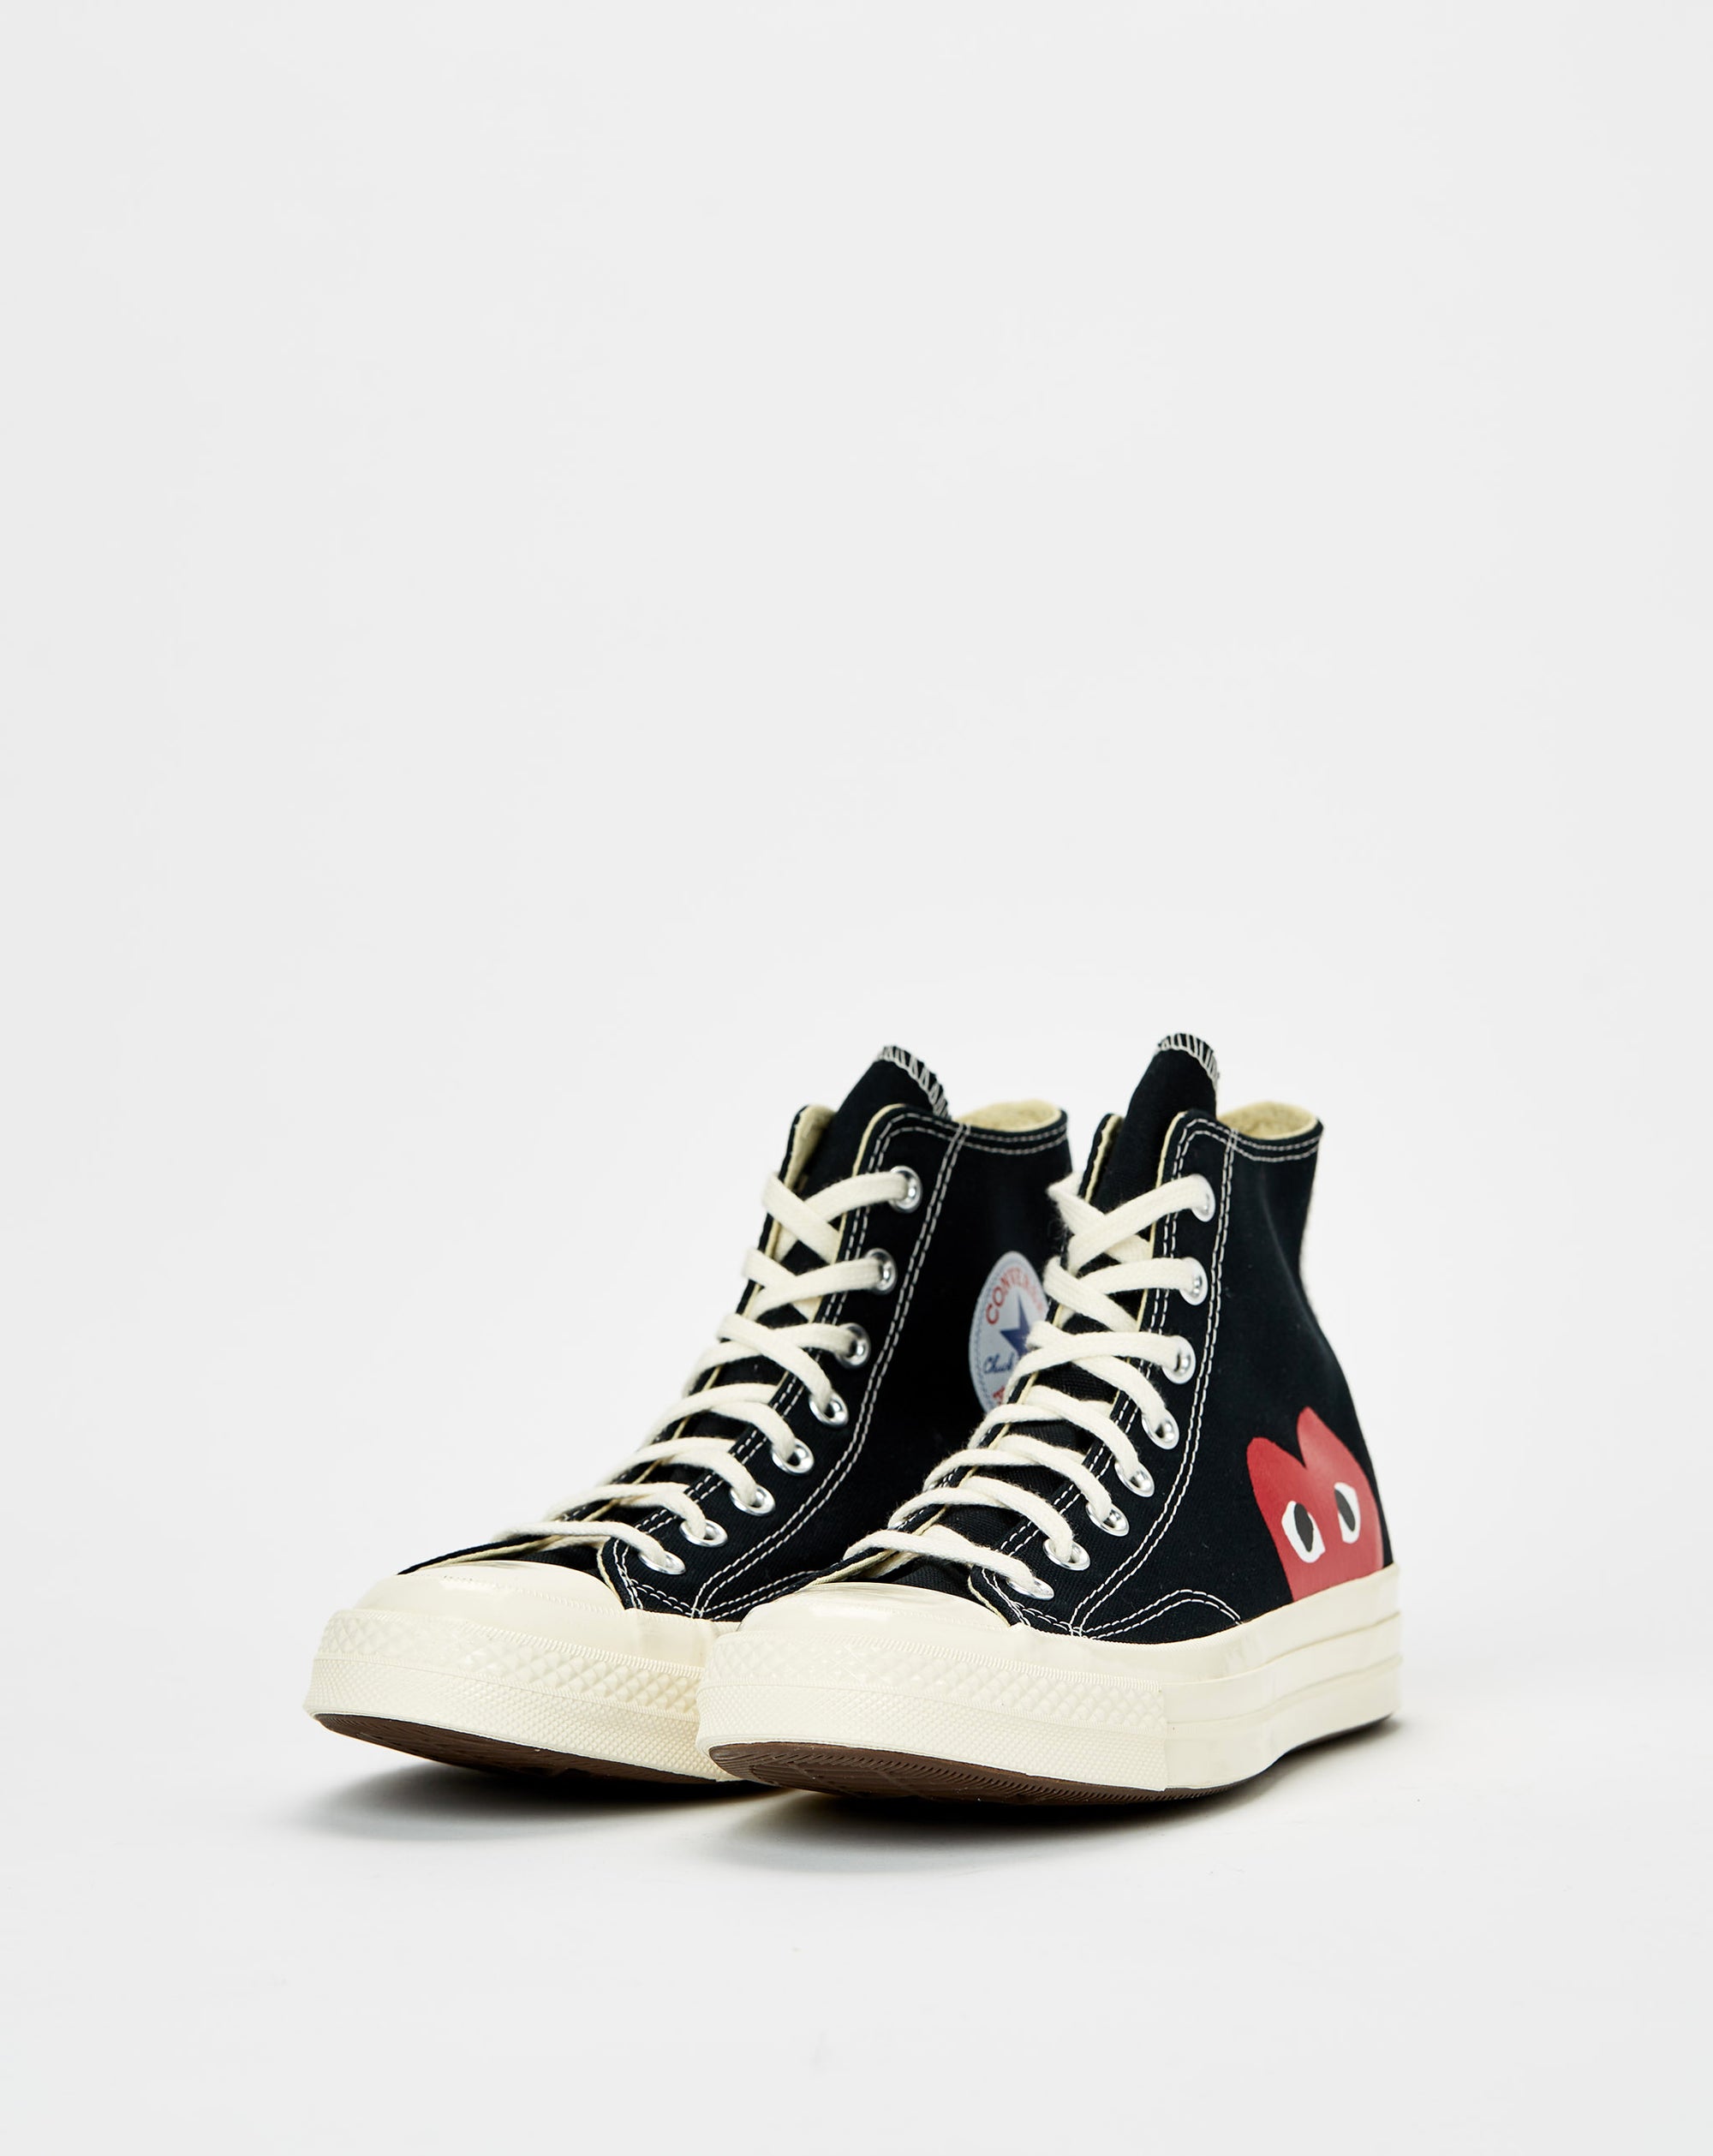 Comme des Garcons Play x Converse Chuck 70 High-Top Sneakers